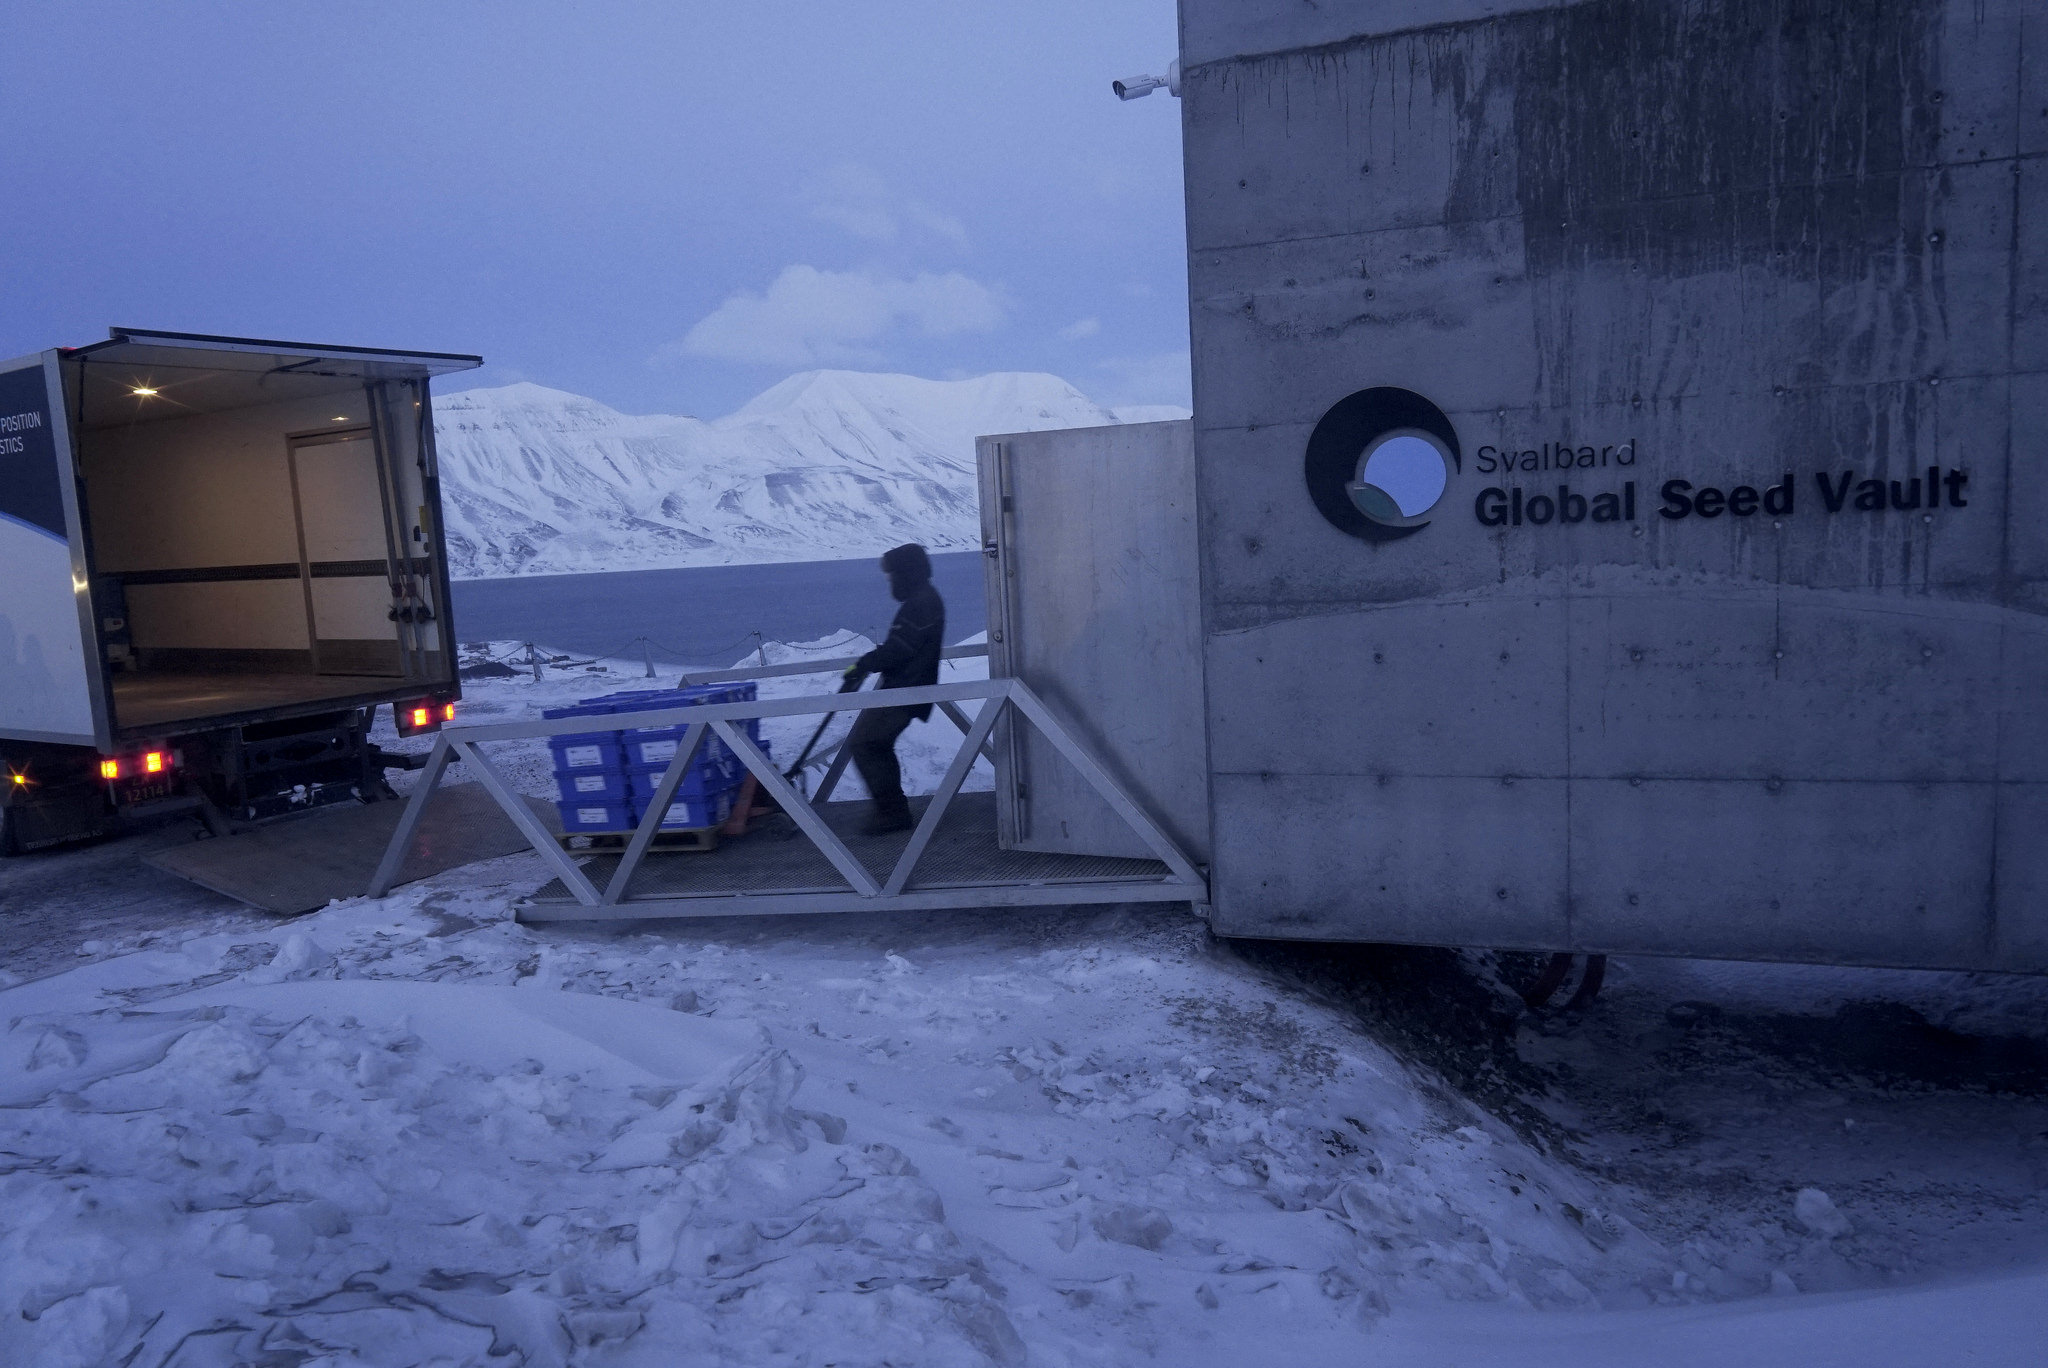  Pallets of seed boxes are ushered through Svalbard’s entrance. 